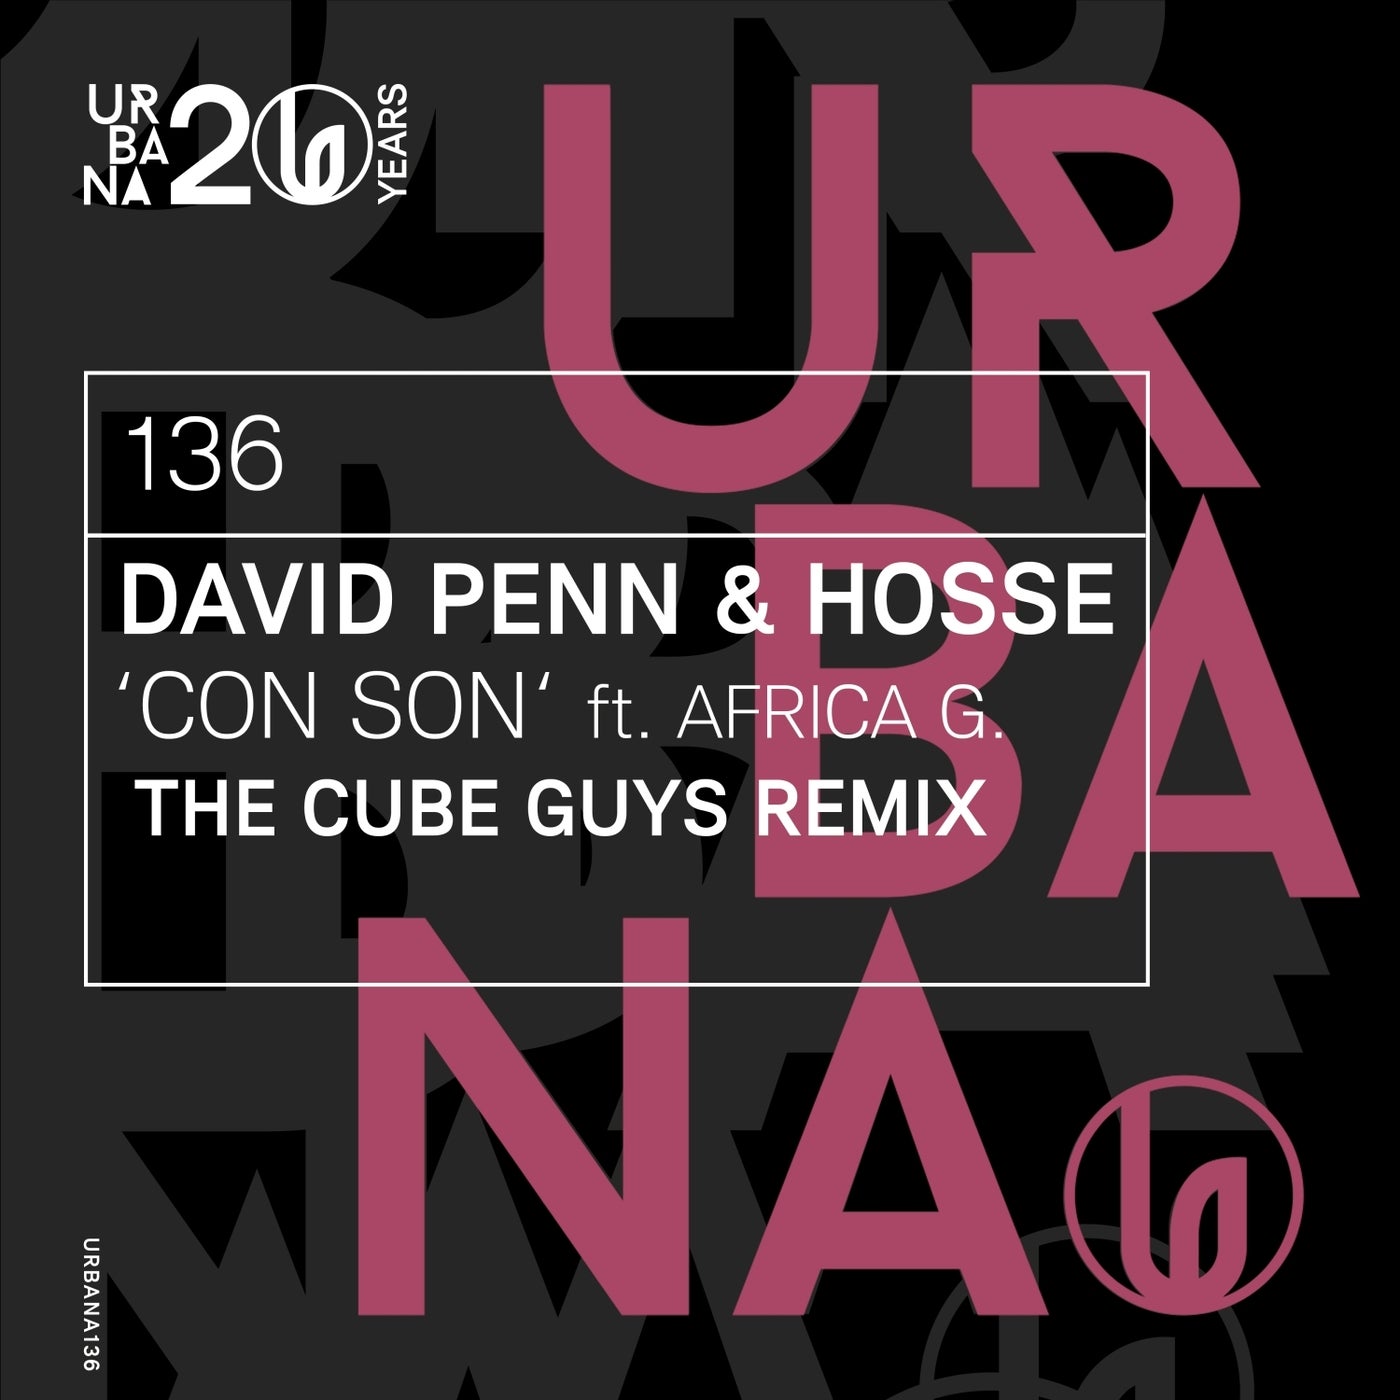 image cover: David Penn, Hosse, Africa G. - Con Son (ft. Afric G.) (THE CUBE GUYS REMIX) on Urbana Recordings